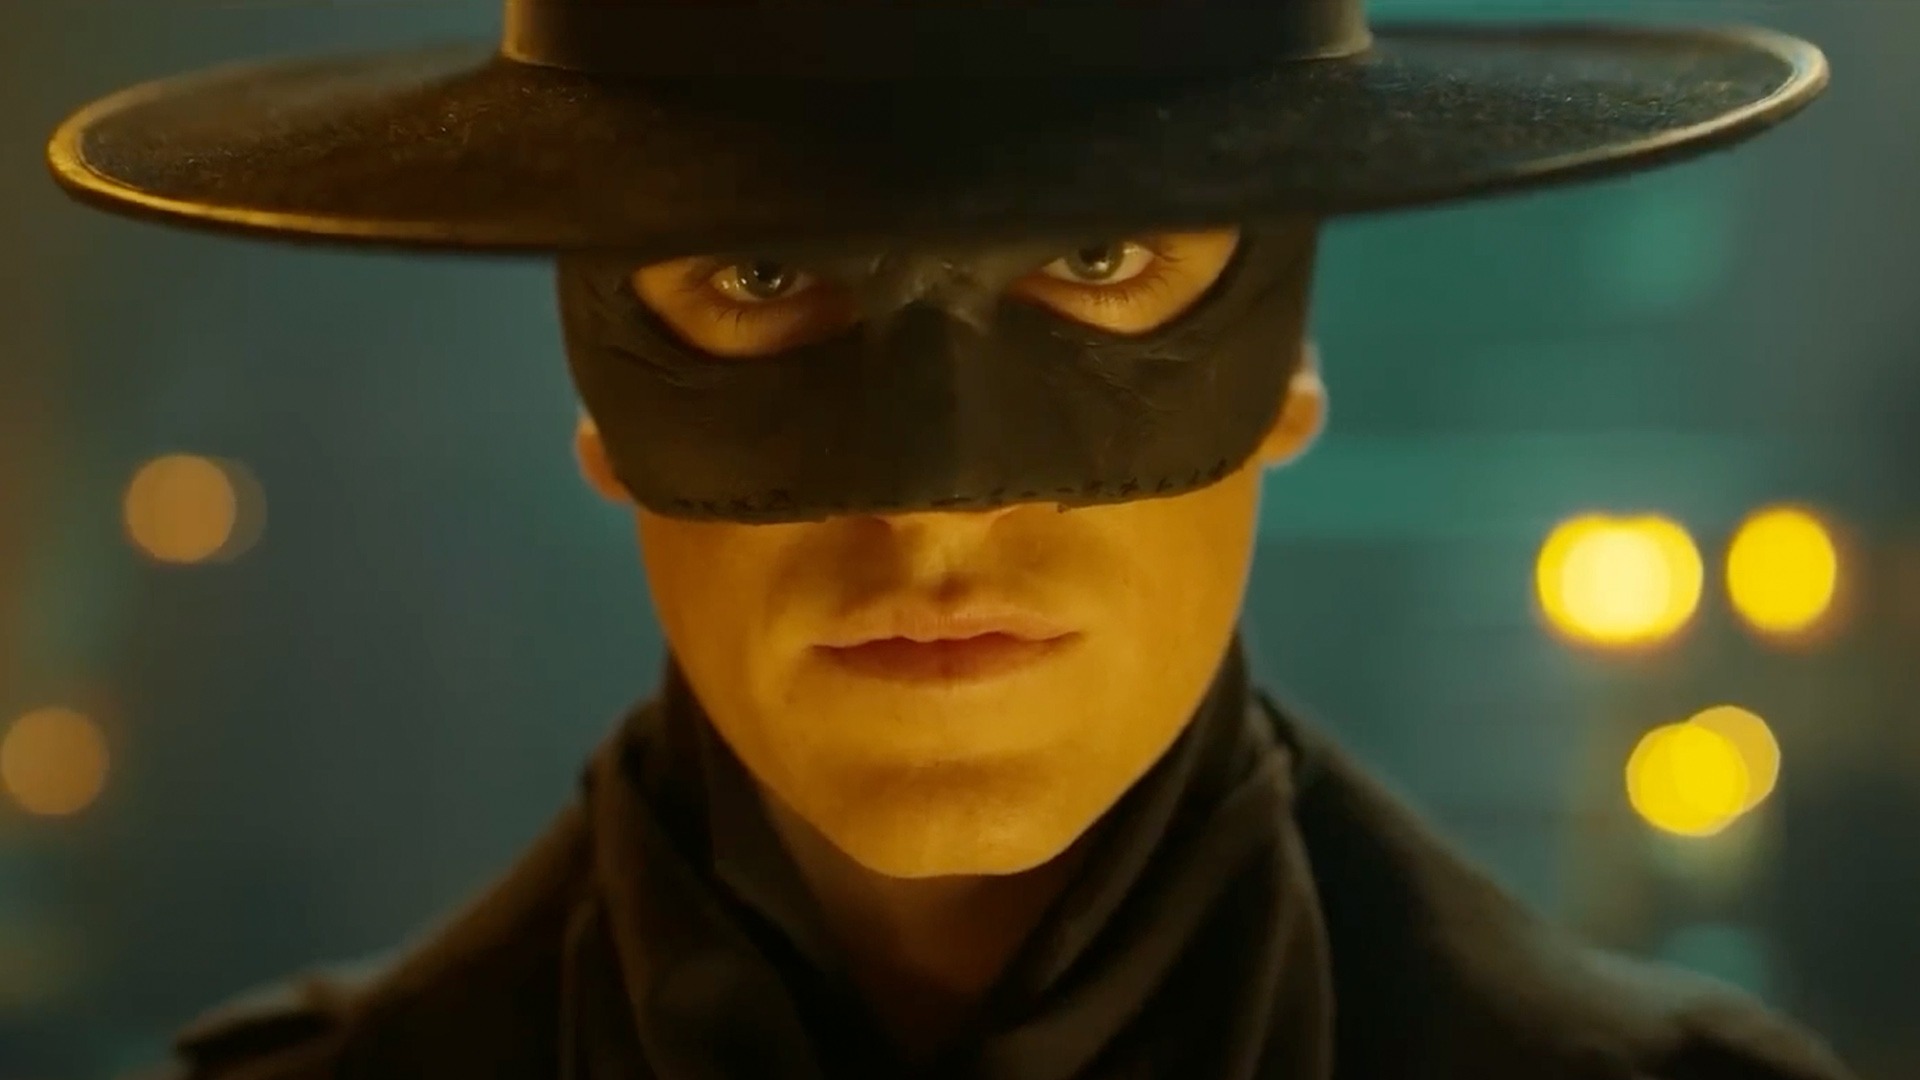 Zorro (2024) Streaming Release Date: When Is It Coming Out on  Prime  Video?